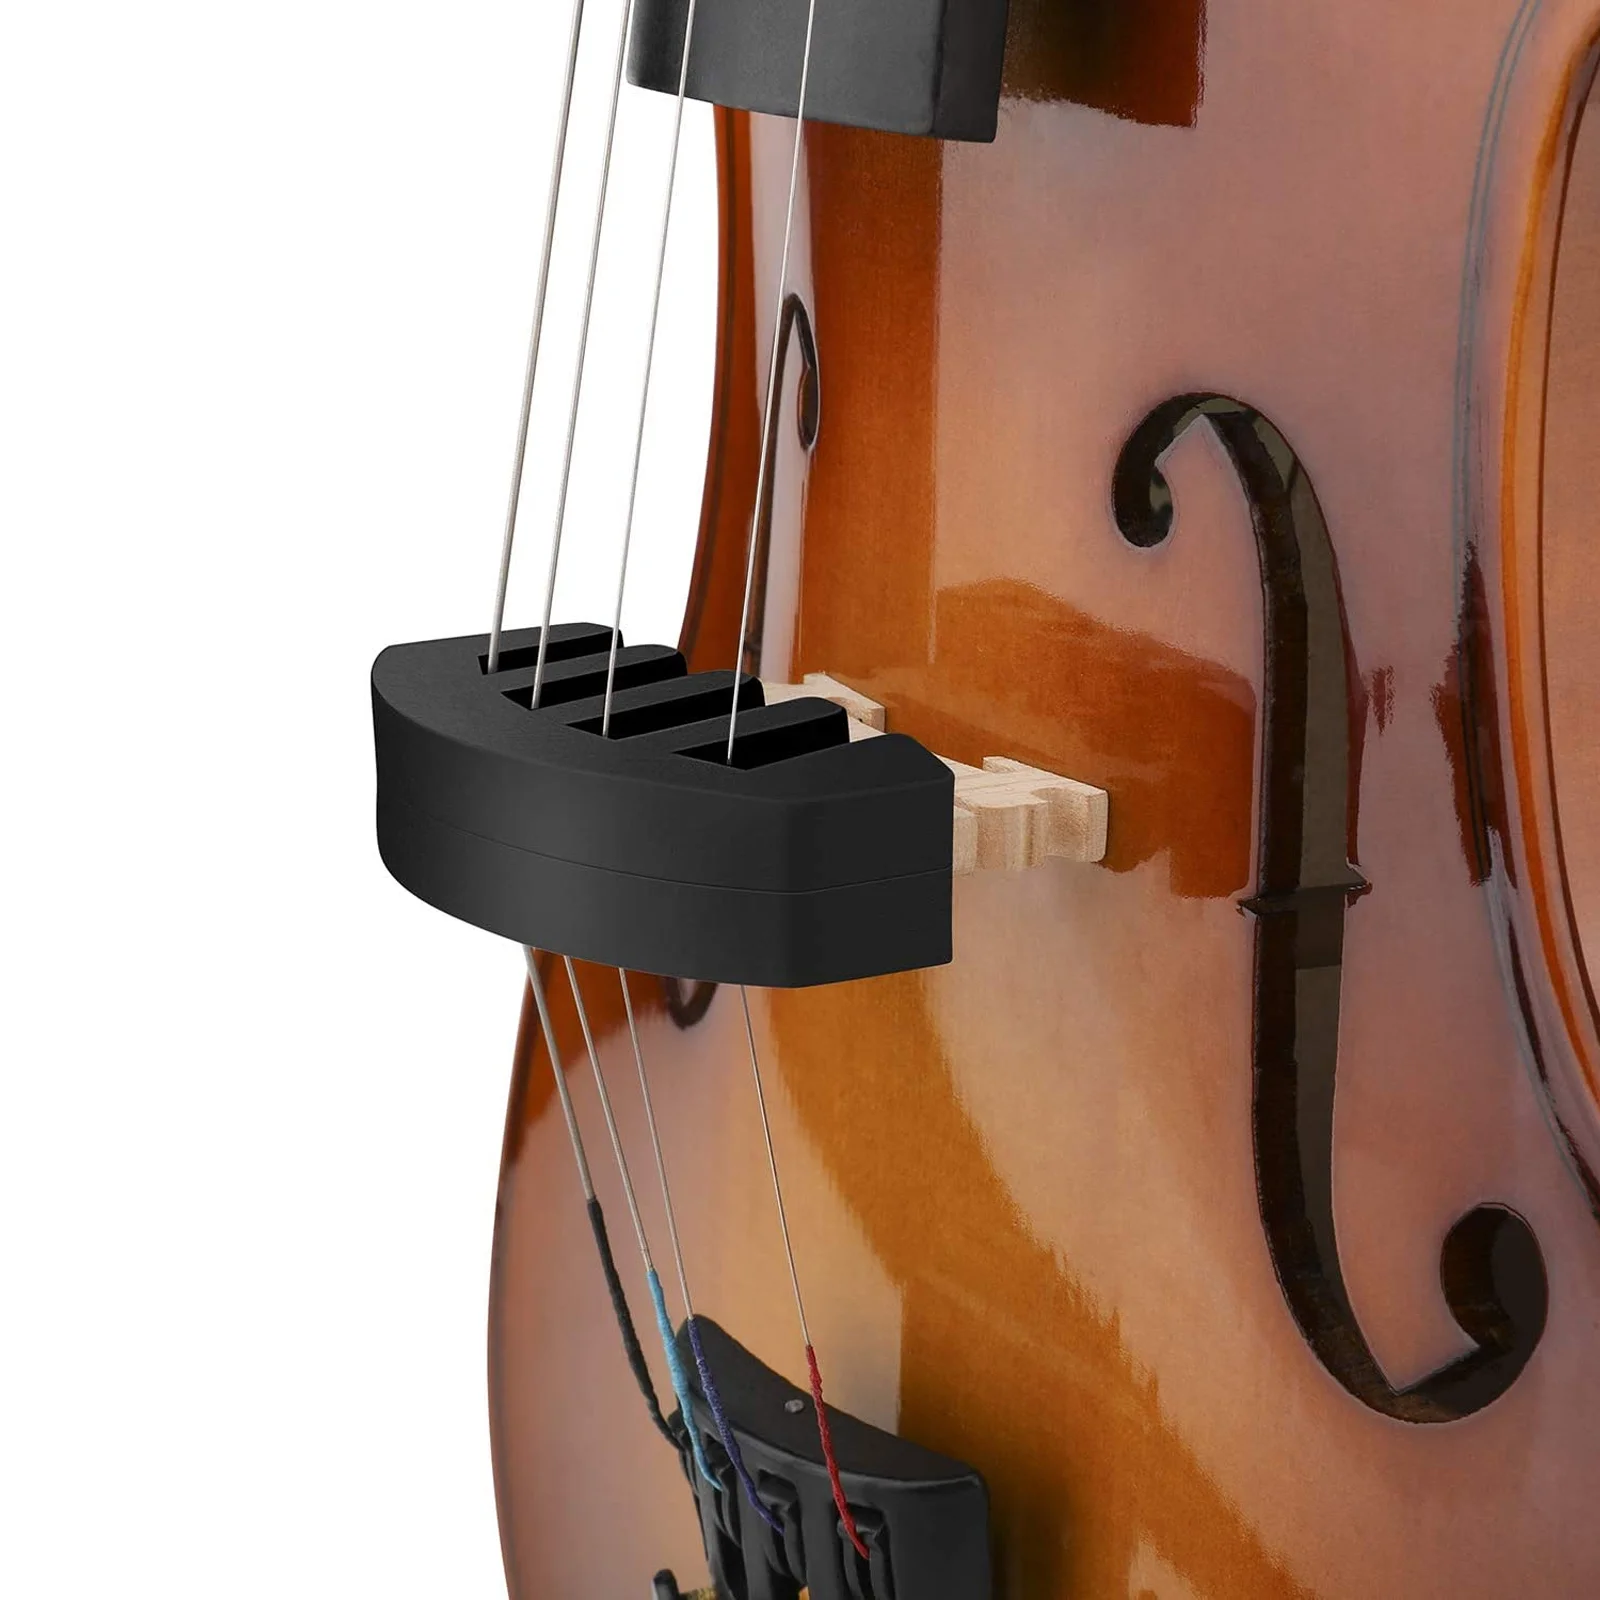 

Clear Stickers Scale 4/4 Violin Full Size Guide Label Chart Applique Supply Accessory Notes Fingerboard Accessories